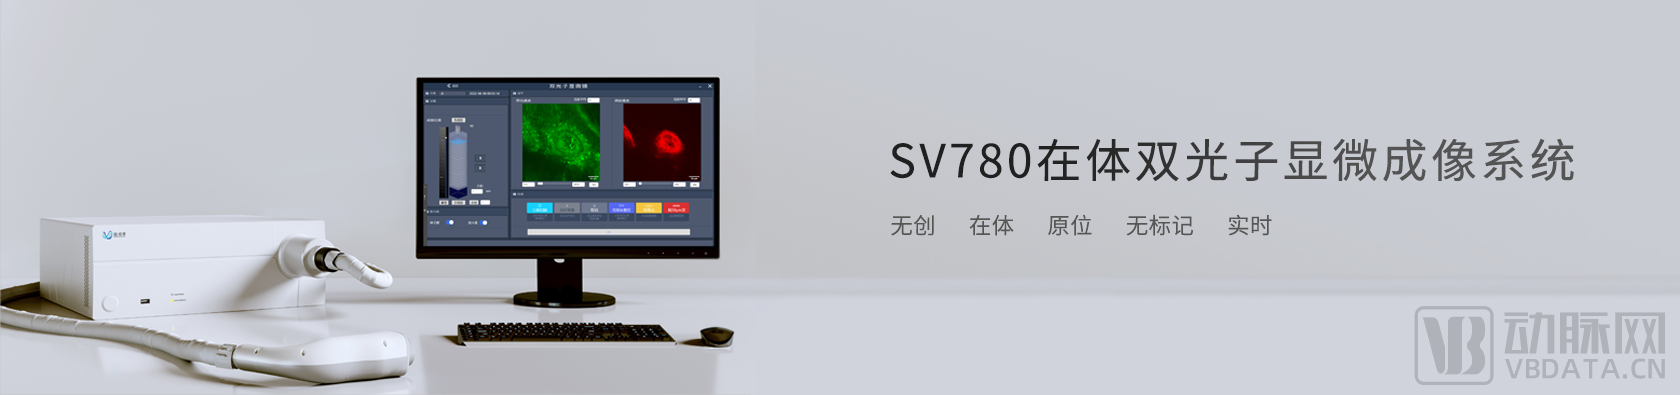 SV780banner图.png